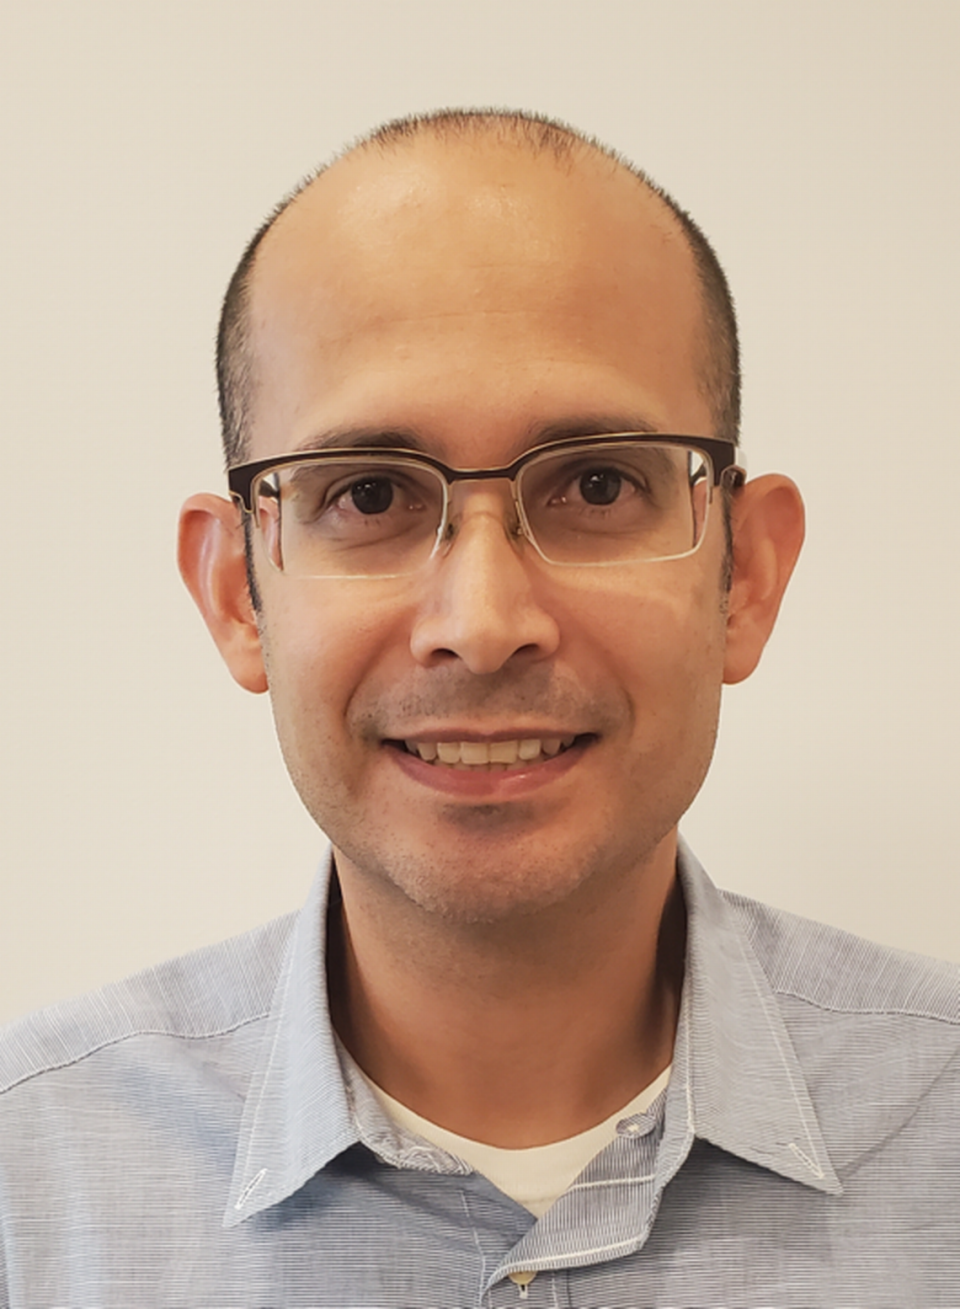 Edward Flores is an associate professor of sociology, and faculty director of the UC Merced Community and Labor Center. His areas of expertise include labor, race, immigration, and civic religion.